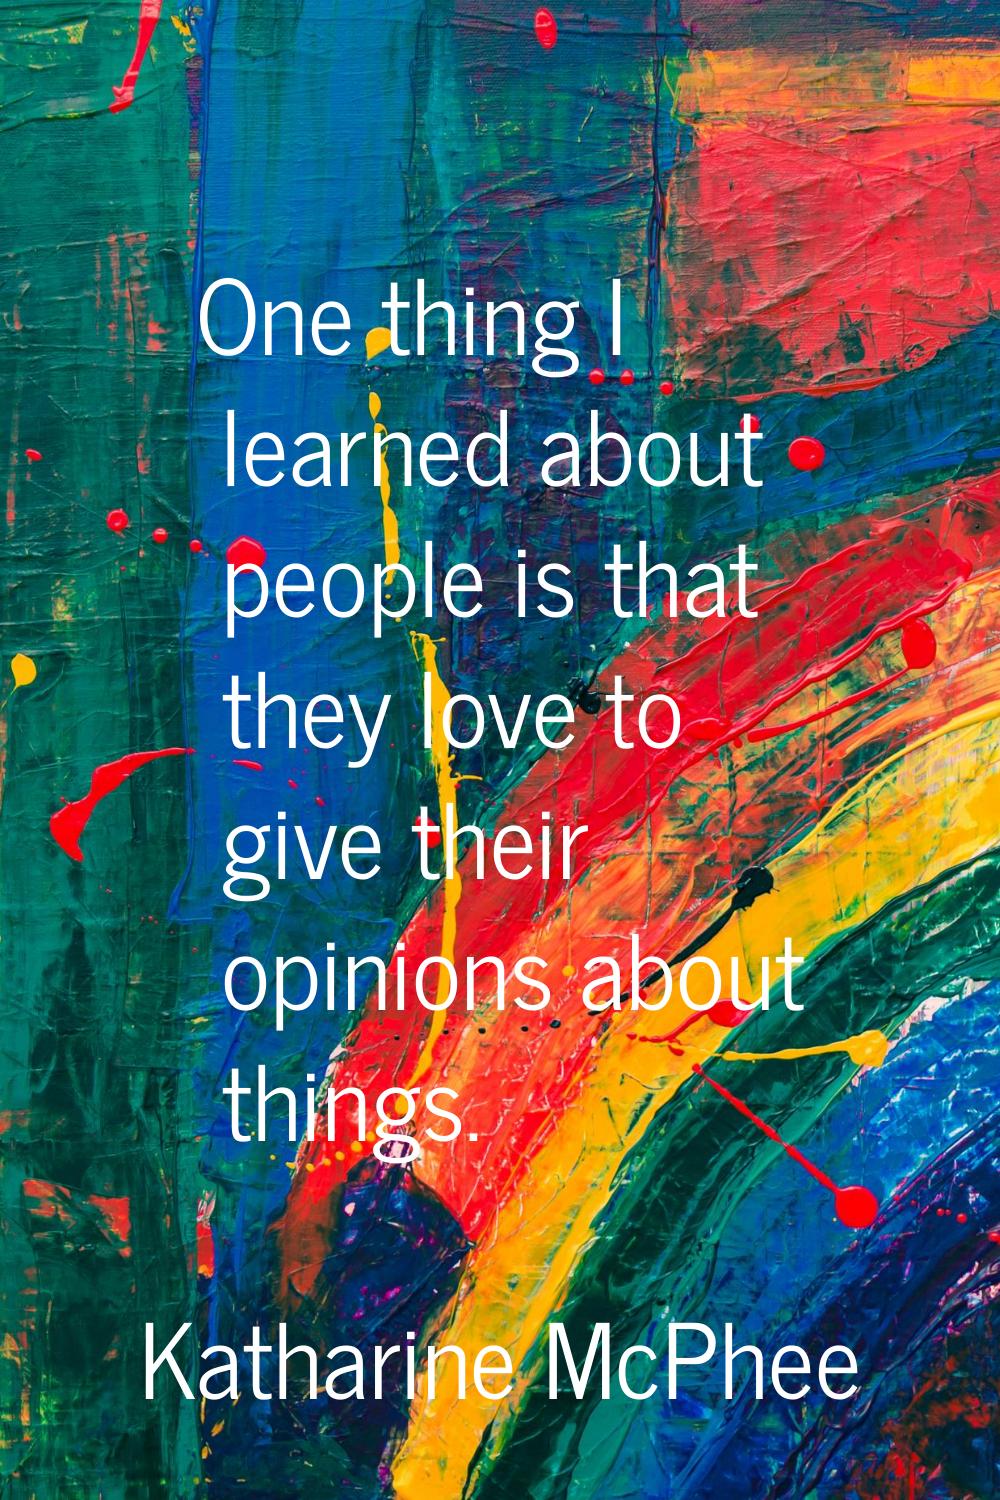 One thing I learned about people is that they love to give their opinions about things.